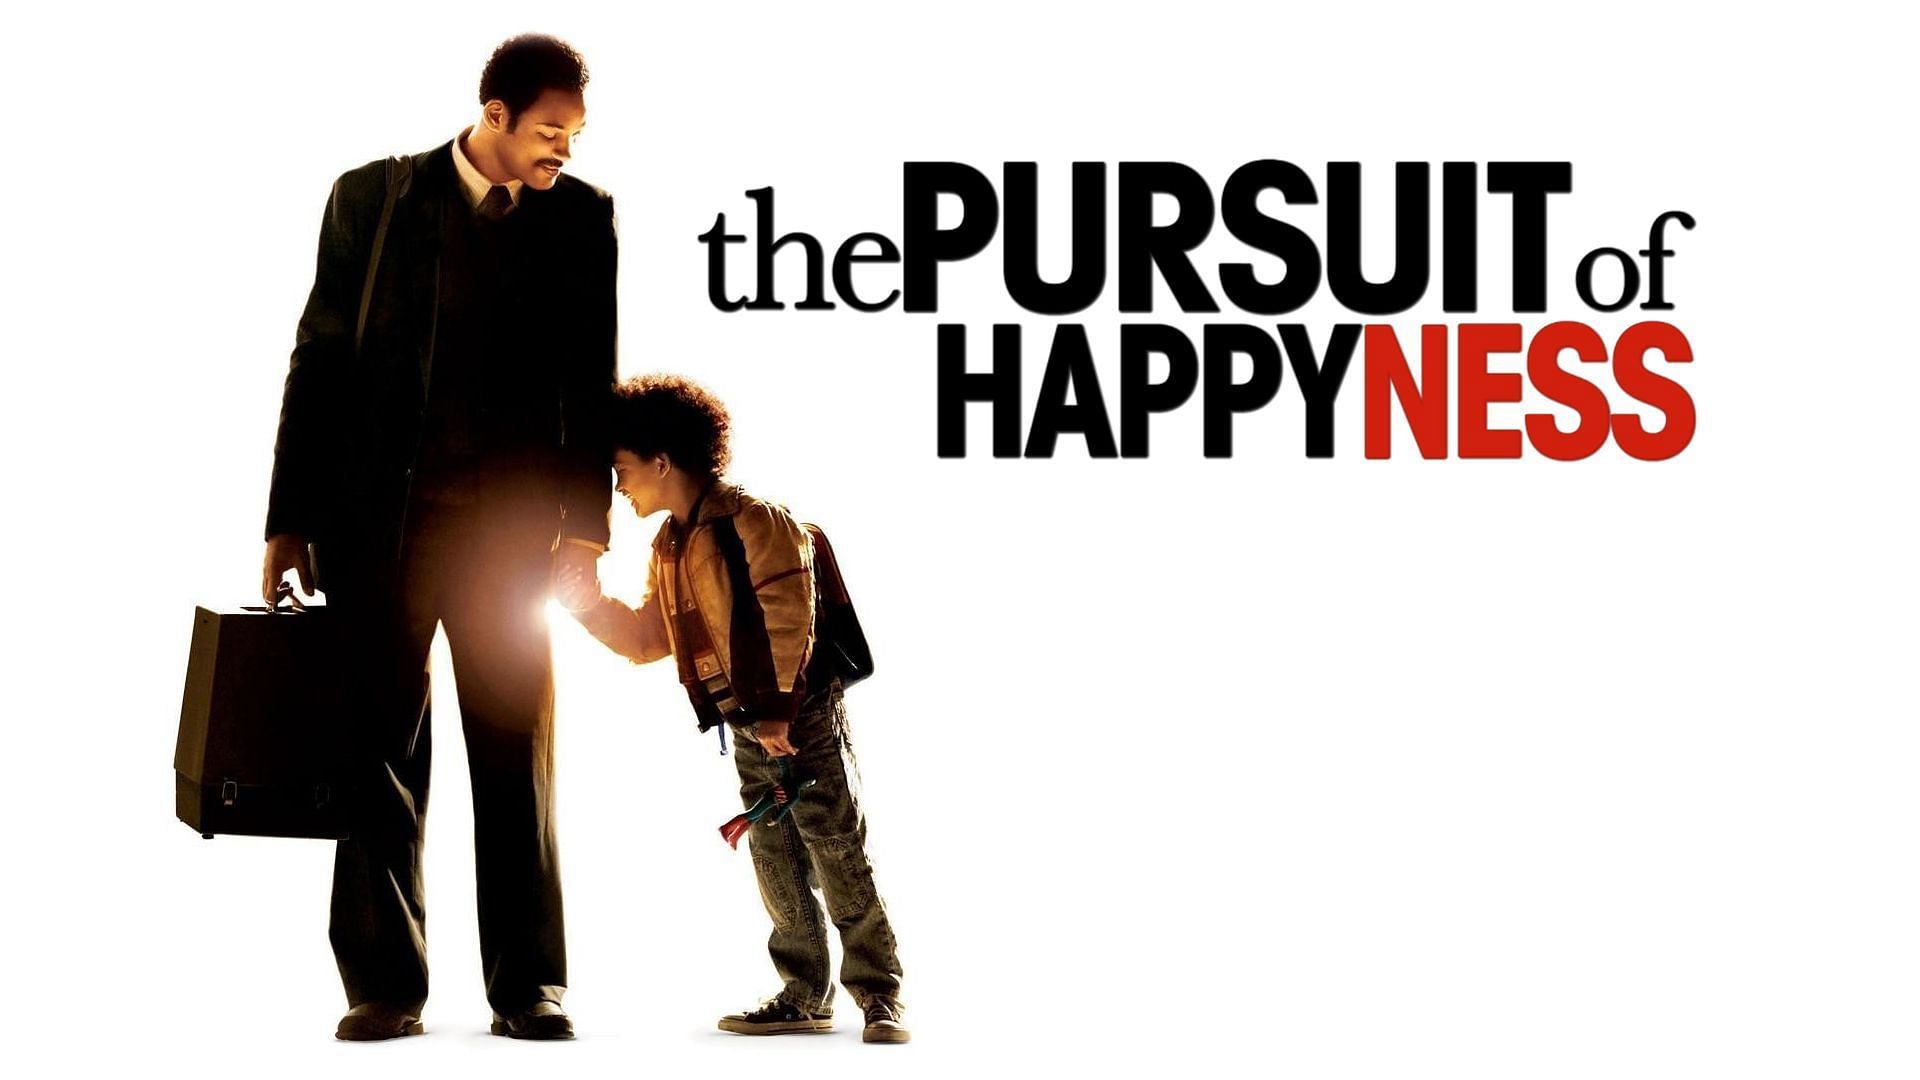 The Pursuit of Happyness (Image via Sony Pictures)